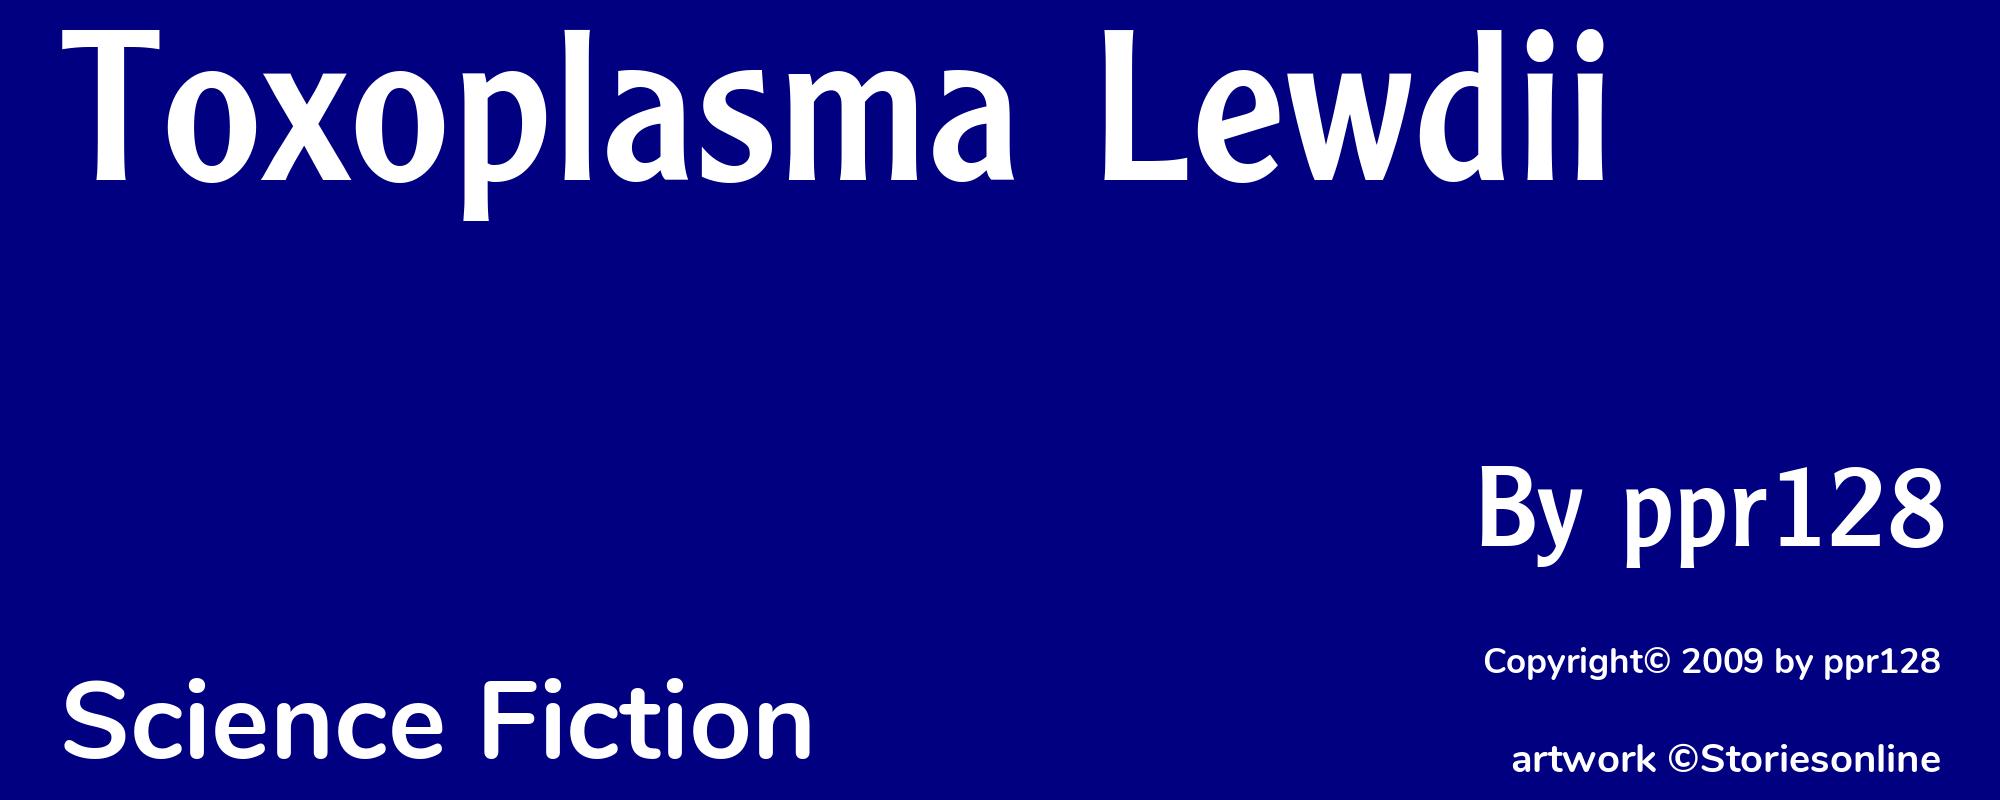 Toxoplasma Lewdii - Cover